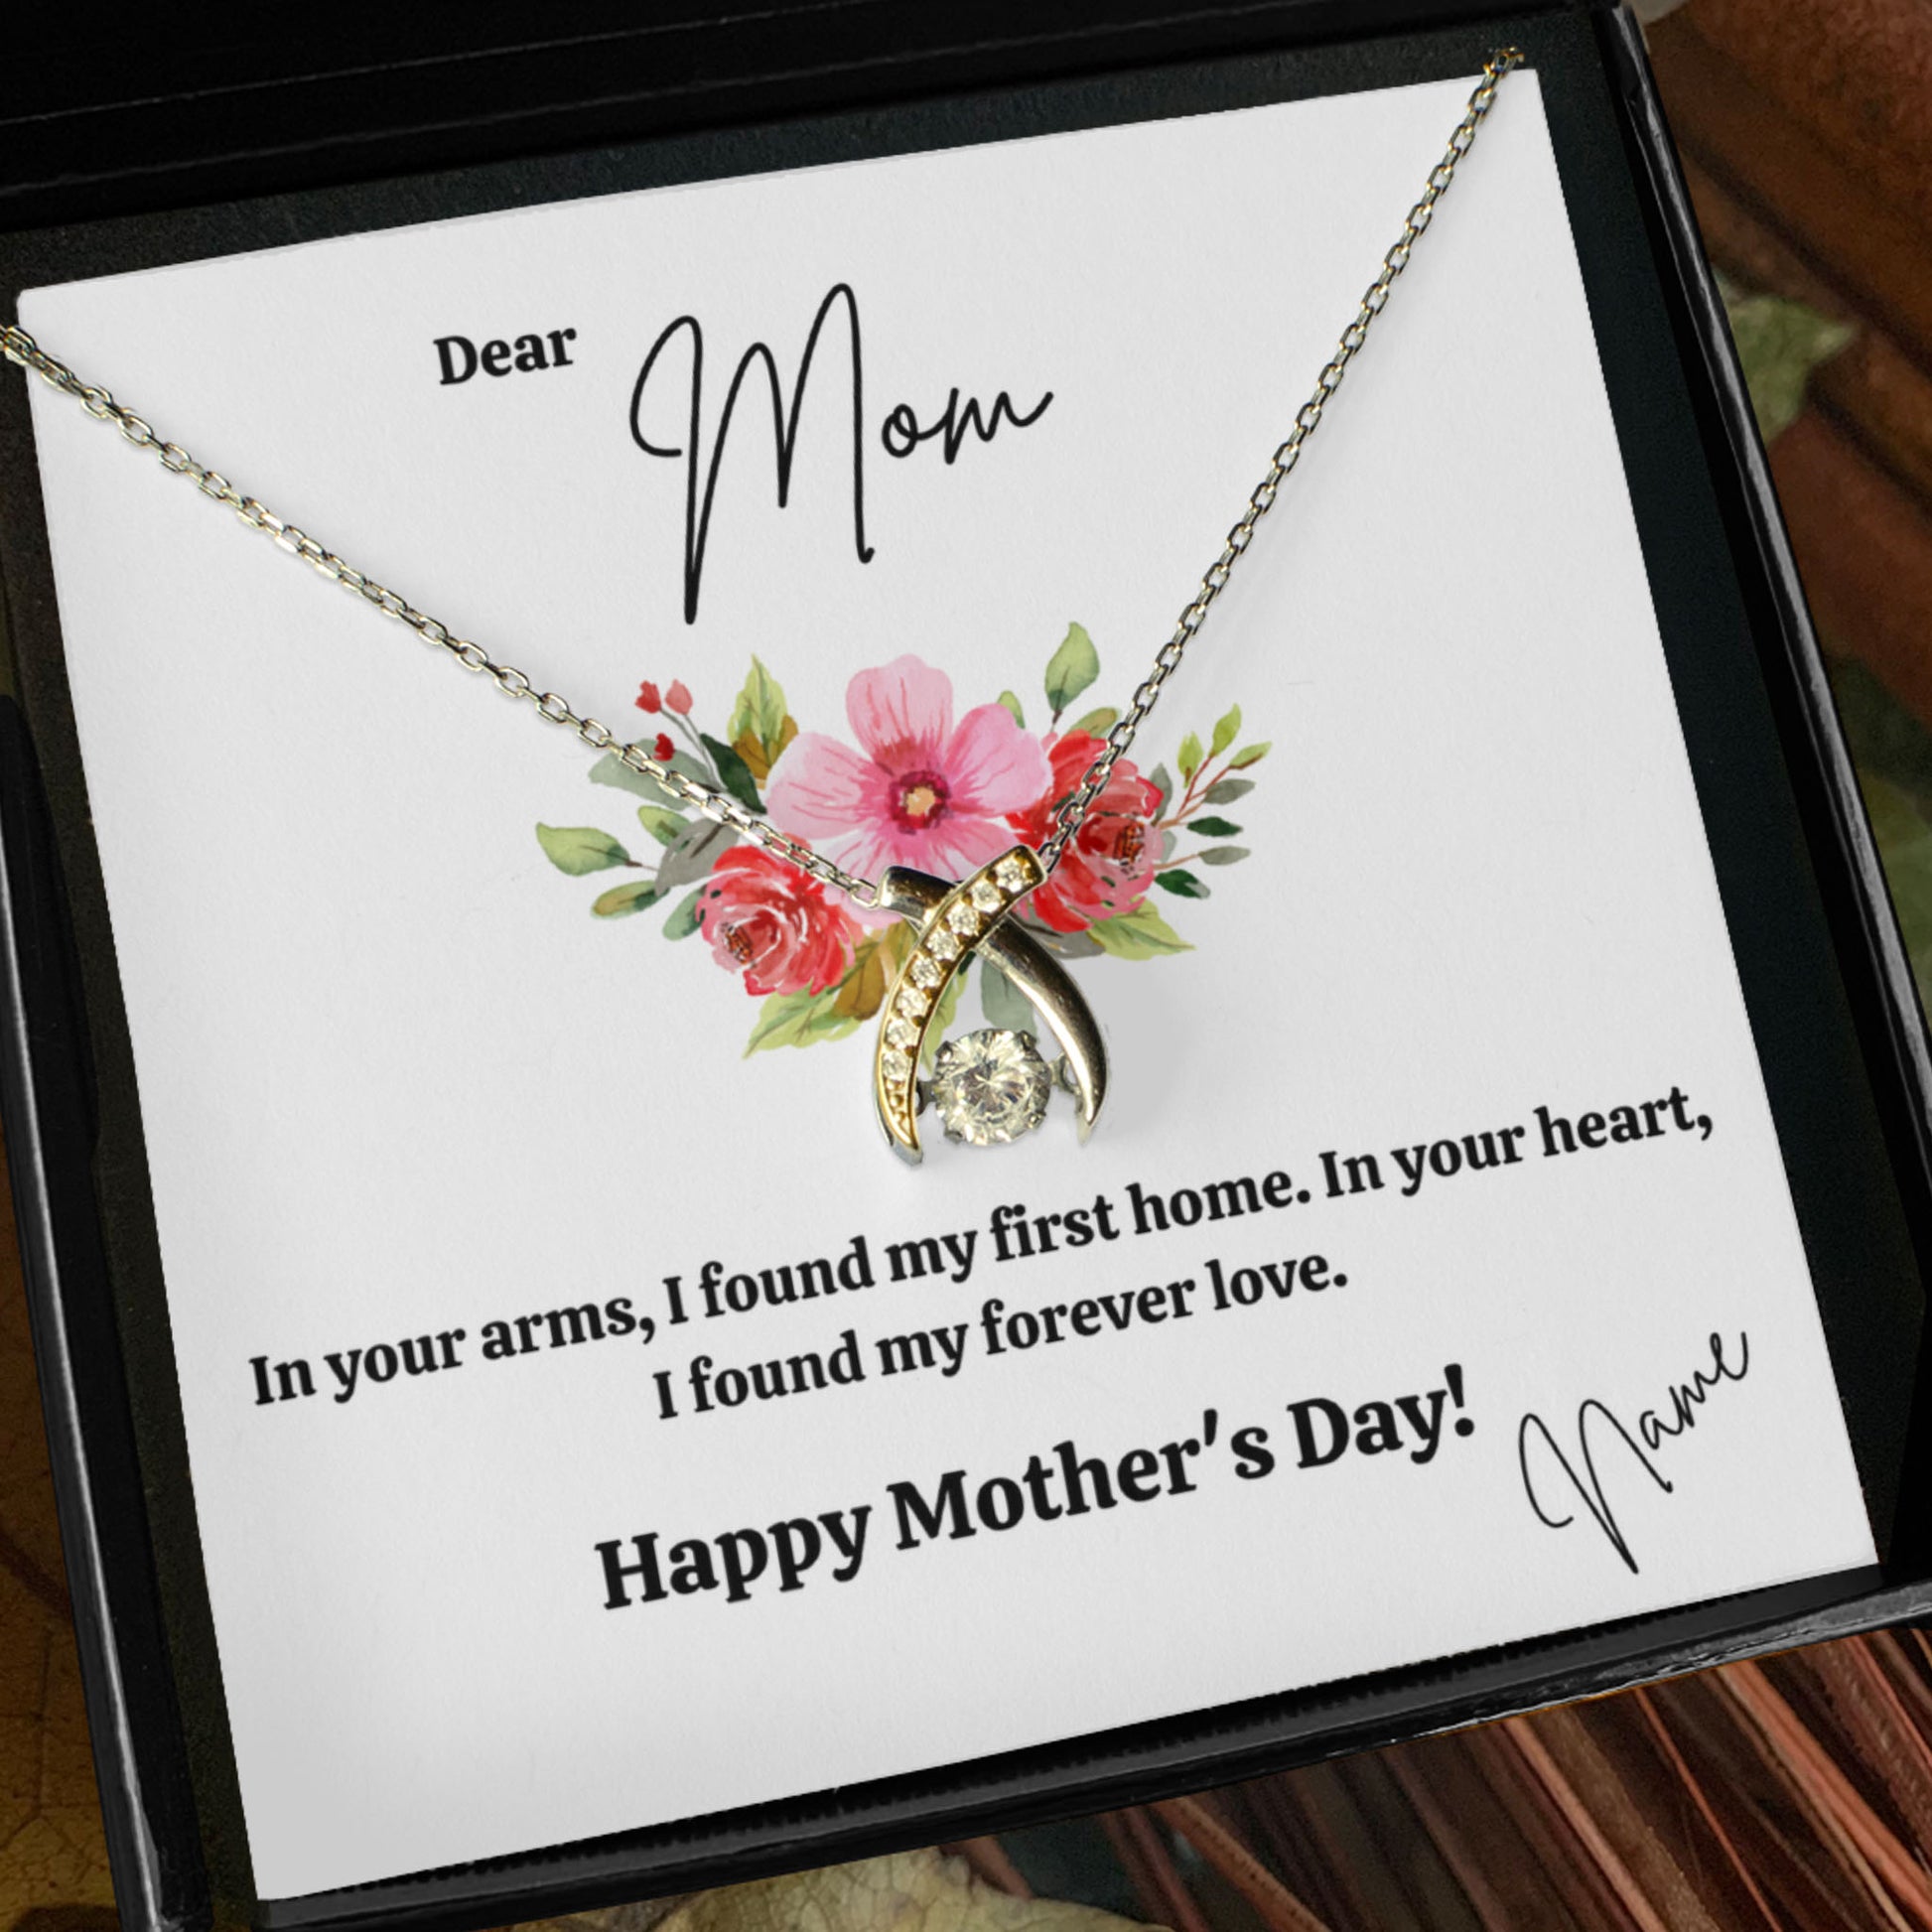 Personalized Necklaces + Message Cards - Silver Zirconia Wishbone Necklace -Personalized Mom Card 